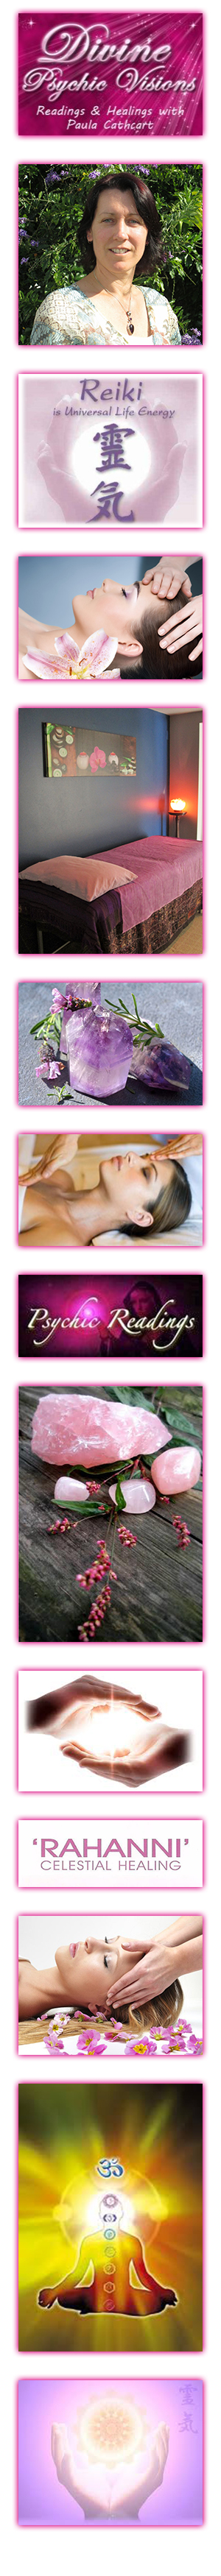 Profile picture for Divine Psychic Visions - Healings, Psychic Readings & Reiki Training